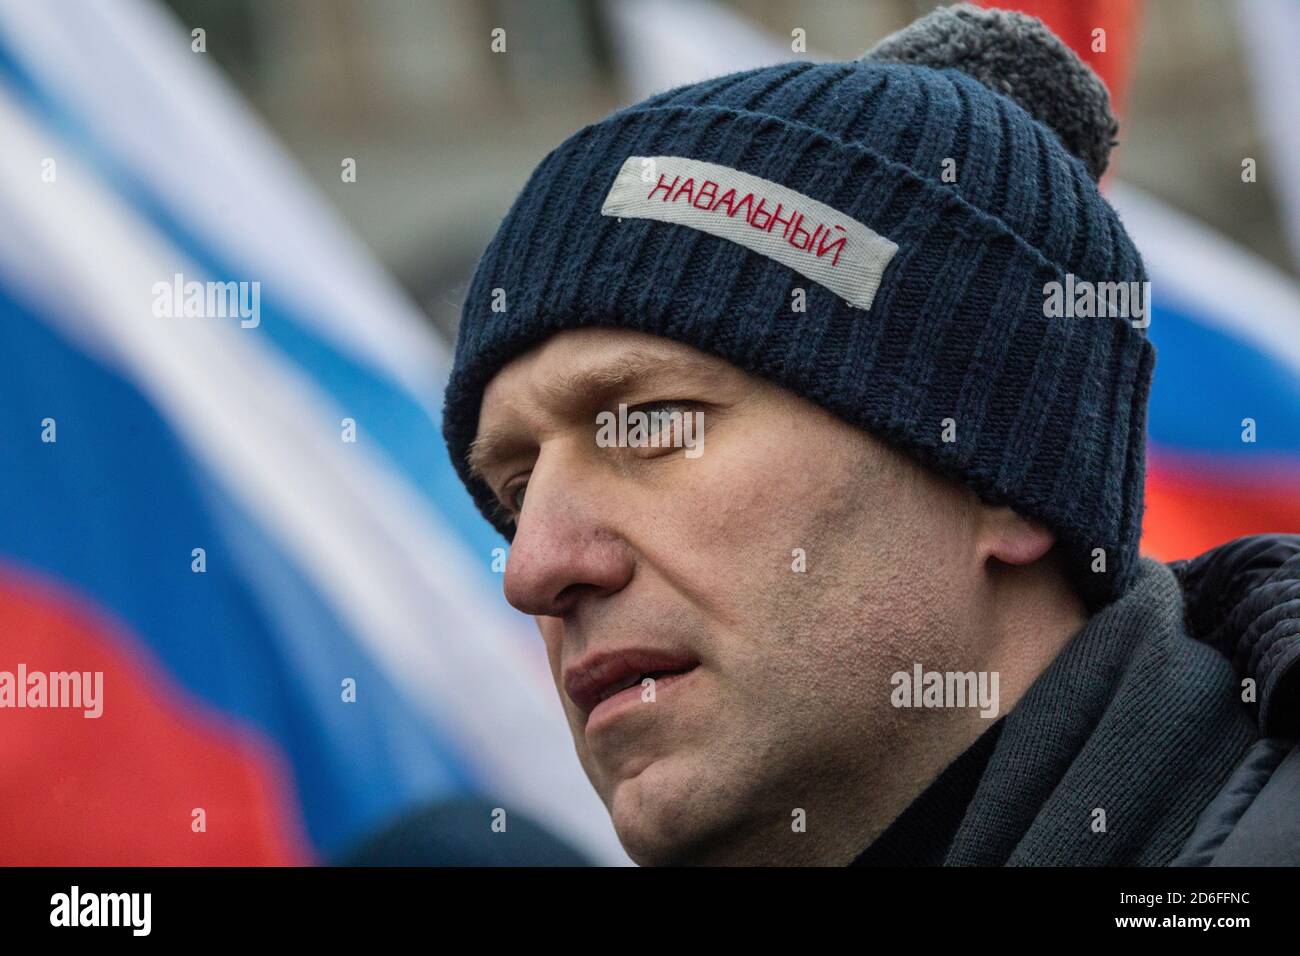 Moscow, Russia. 25th February, 2018.Russian opposition leader Alexei Navalny takes part in a march in Moscow's Strastnoi Boulevard in memory of Russian politician and opposition leader Boris Nemtsov on the eve of the 3rd anniversary of his death in Moscow. The inscription on the cap reads 'Navalny' Stock Photo